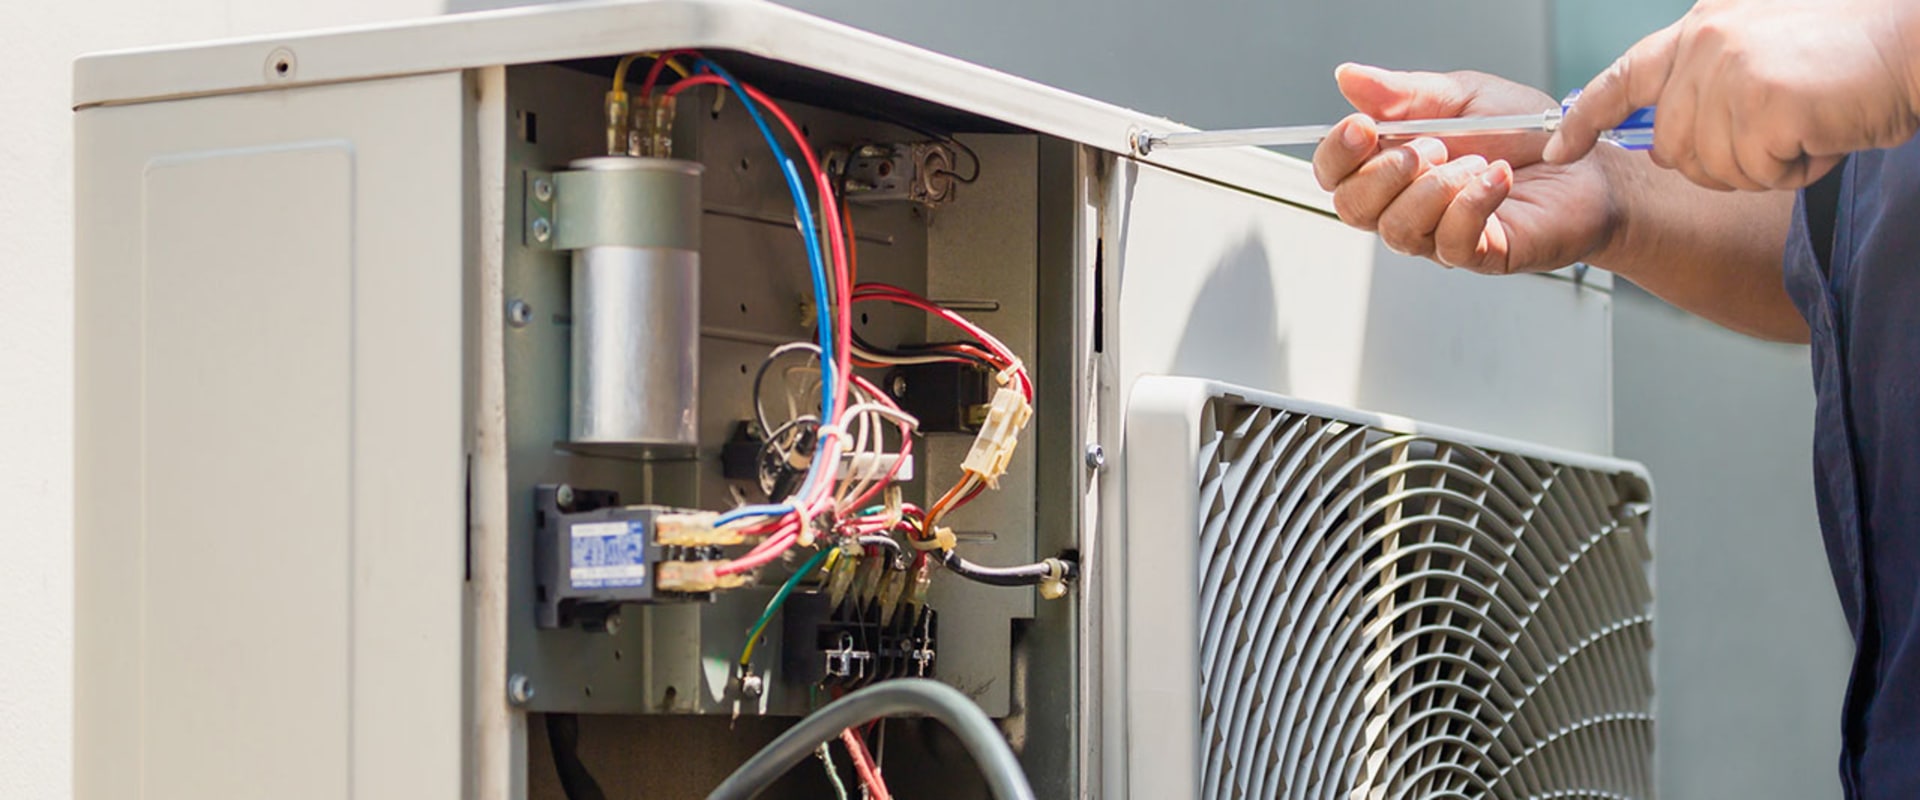 Quality Air Conditioning Repairs and Maintenance Services in Pompano Beach, Florida